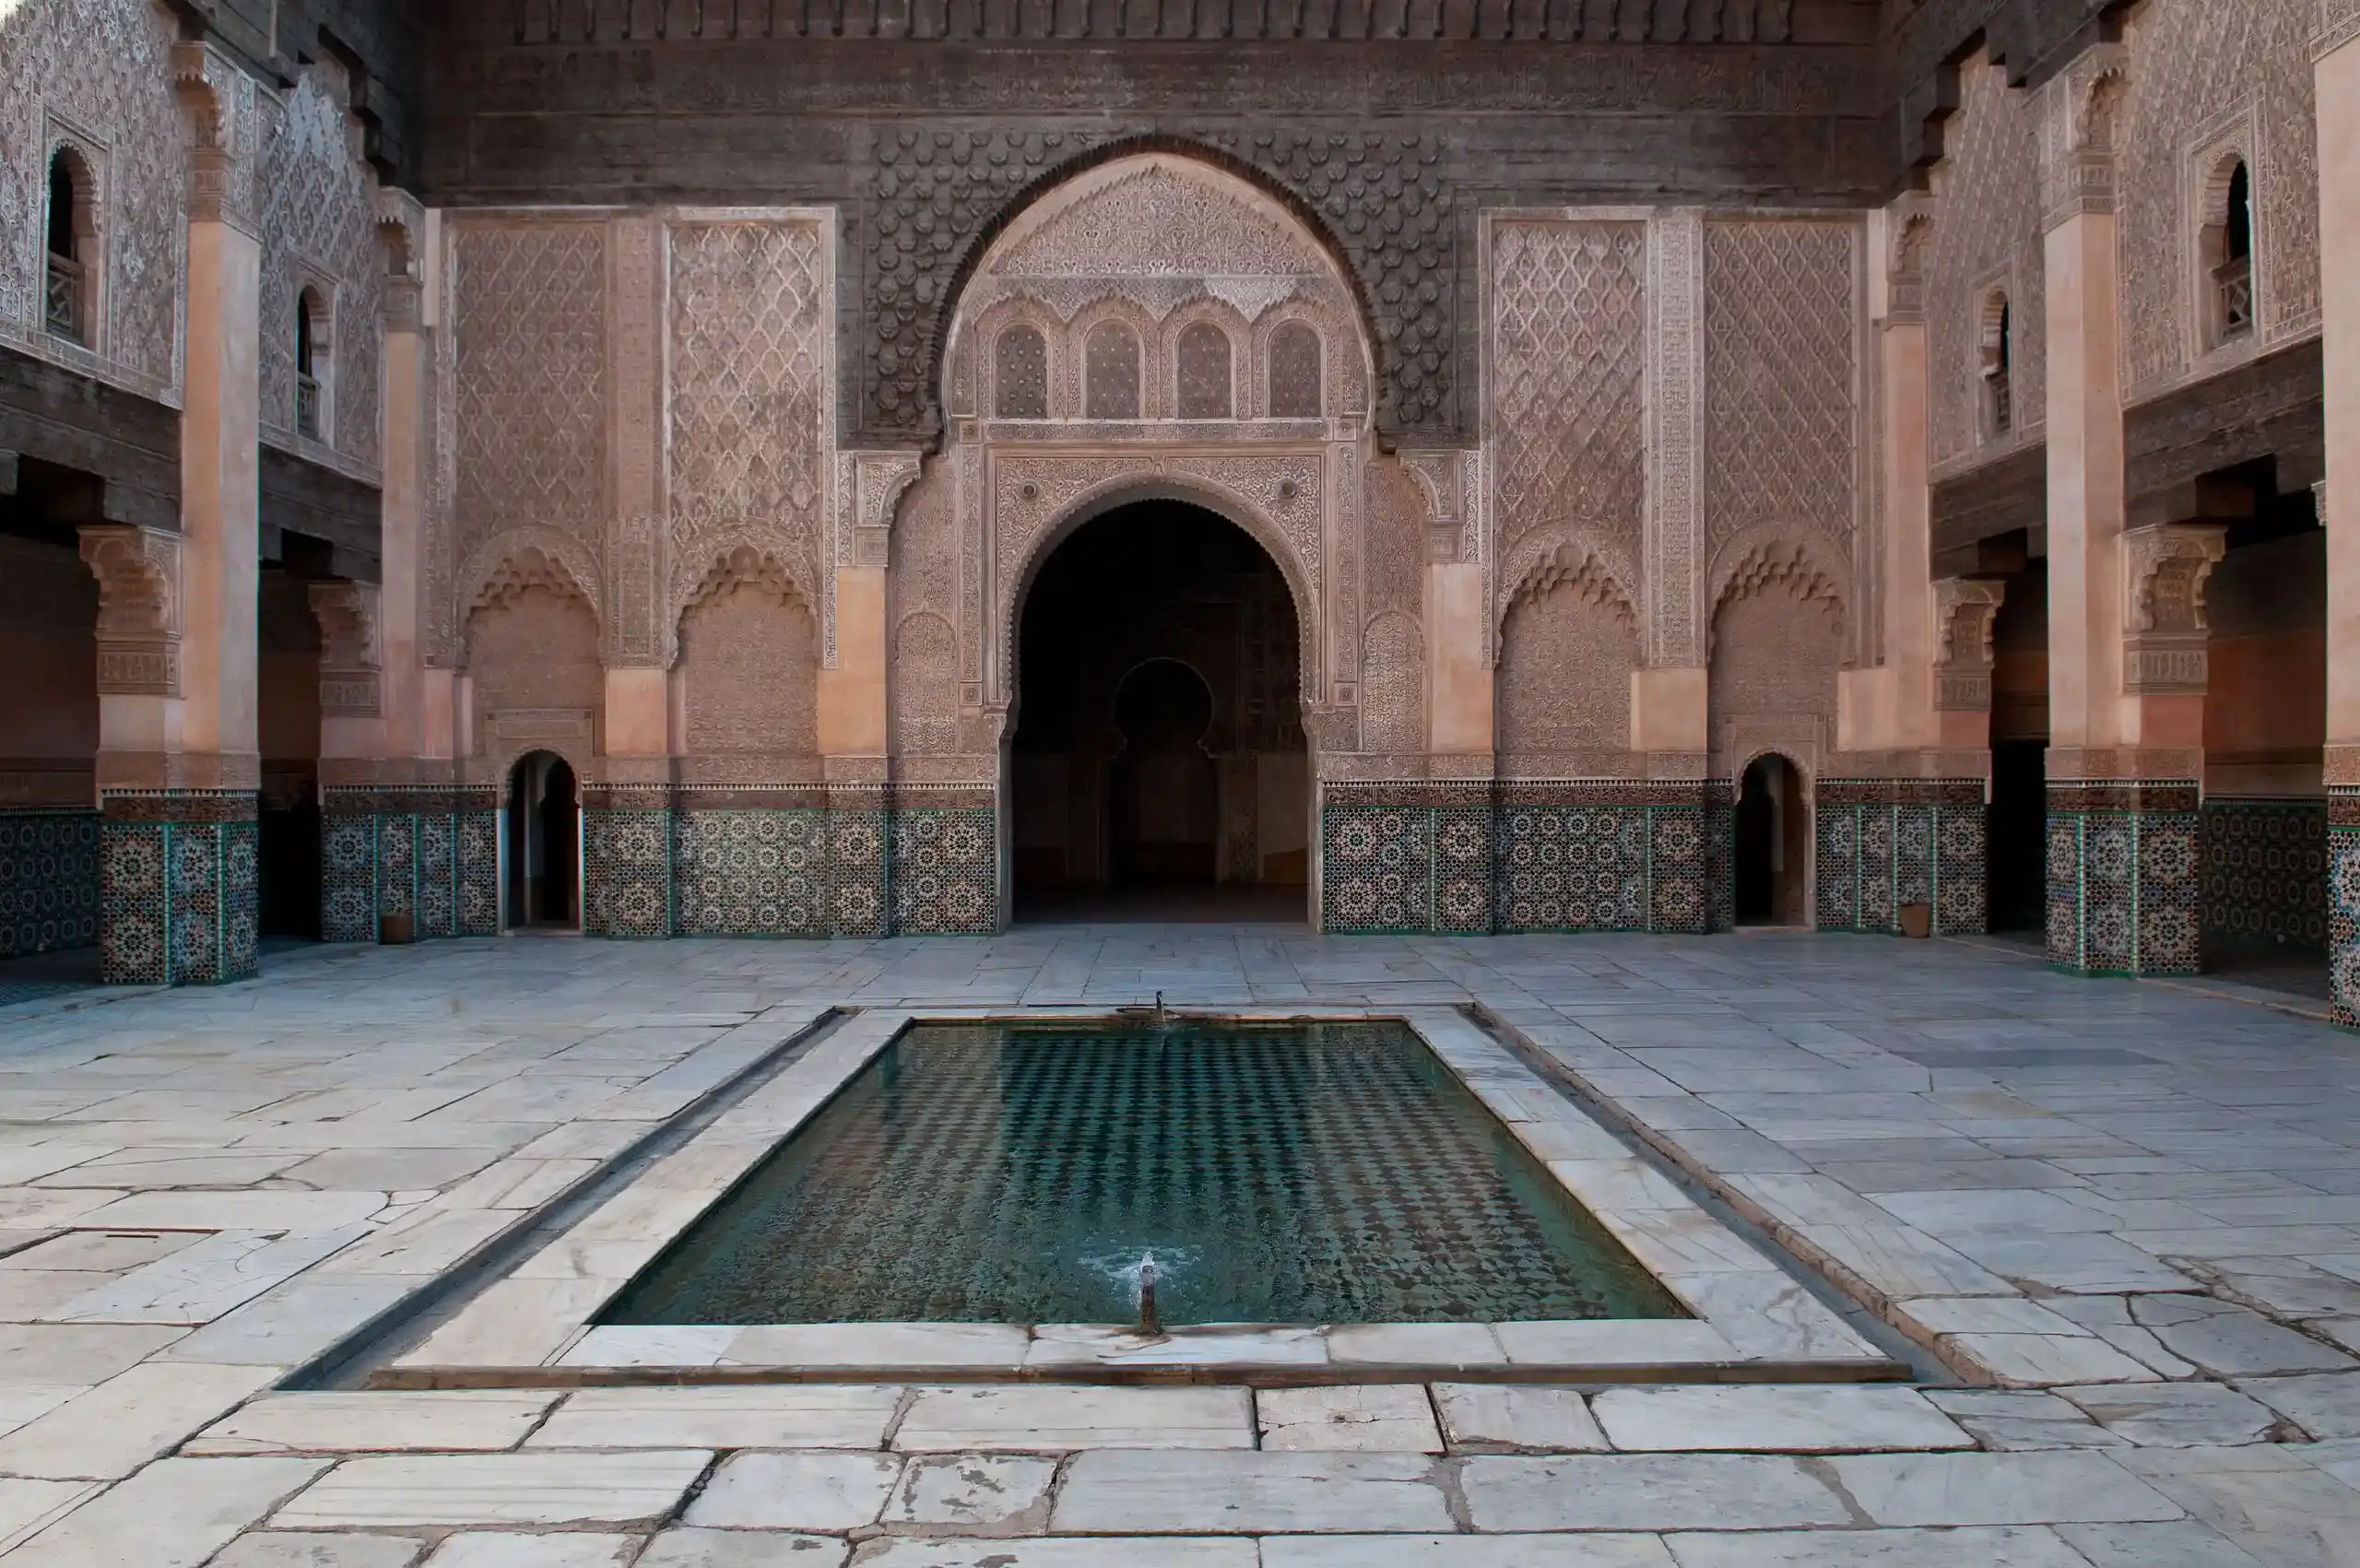 The Ben Youssef Medersa, a monument to visit near Riad Houdou, just a stone's throw from the guesthouse.